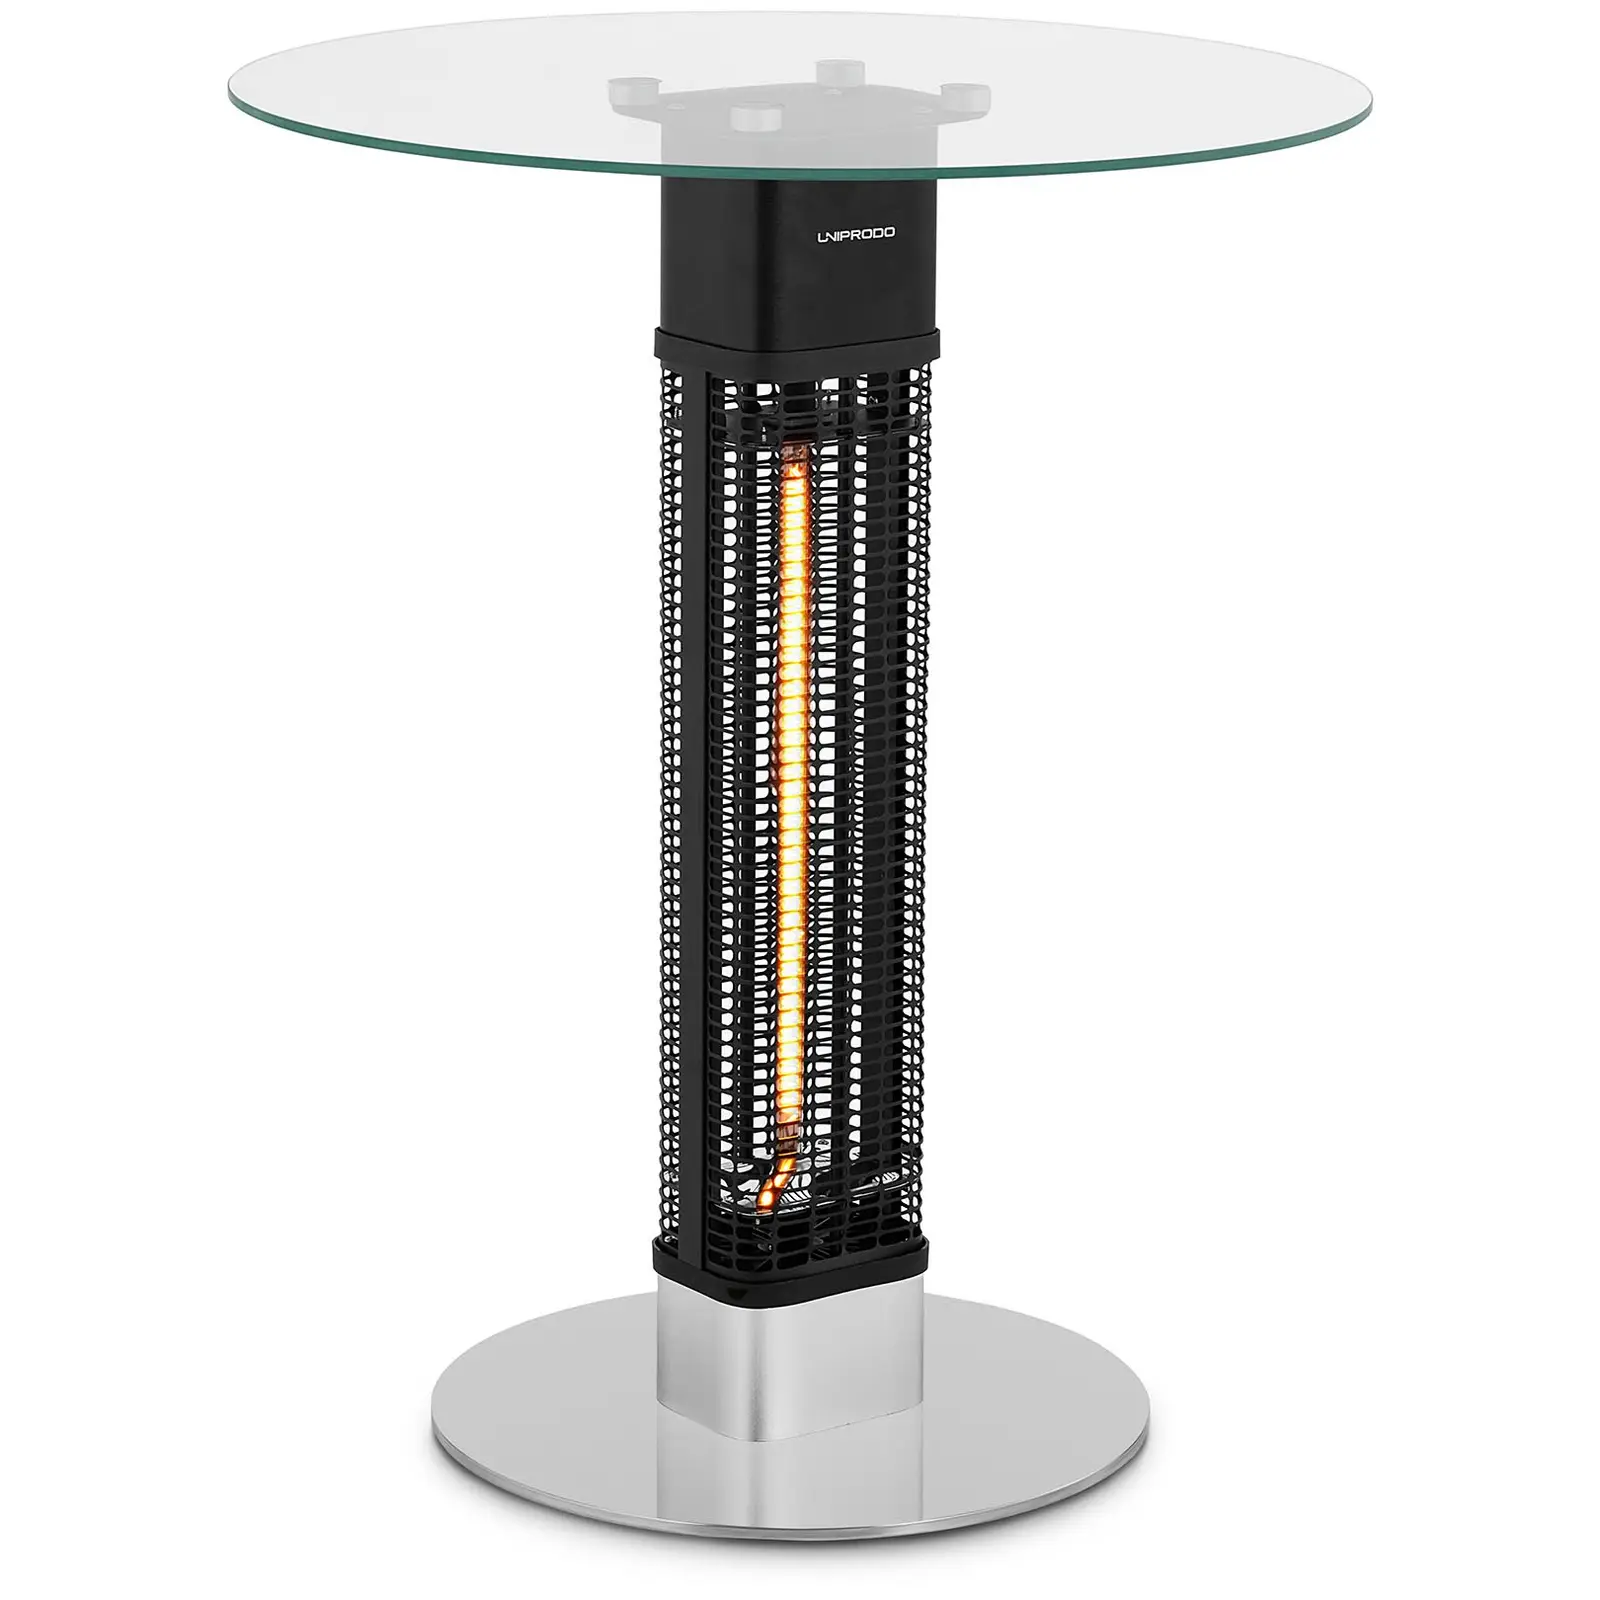 Table radiant heater - Infrared - Ø 60 cm - 1500 W